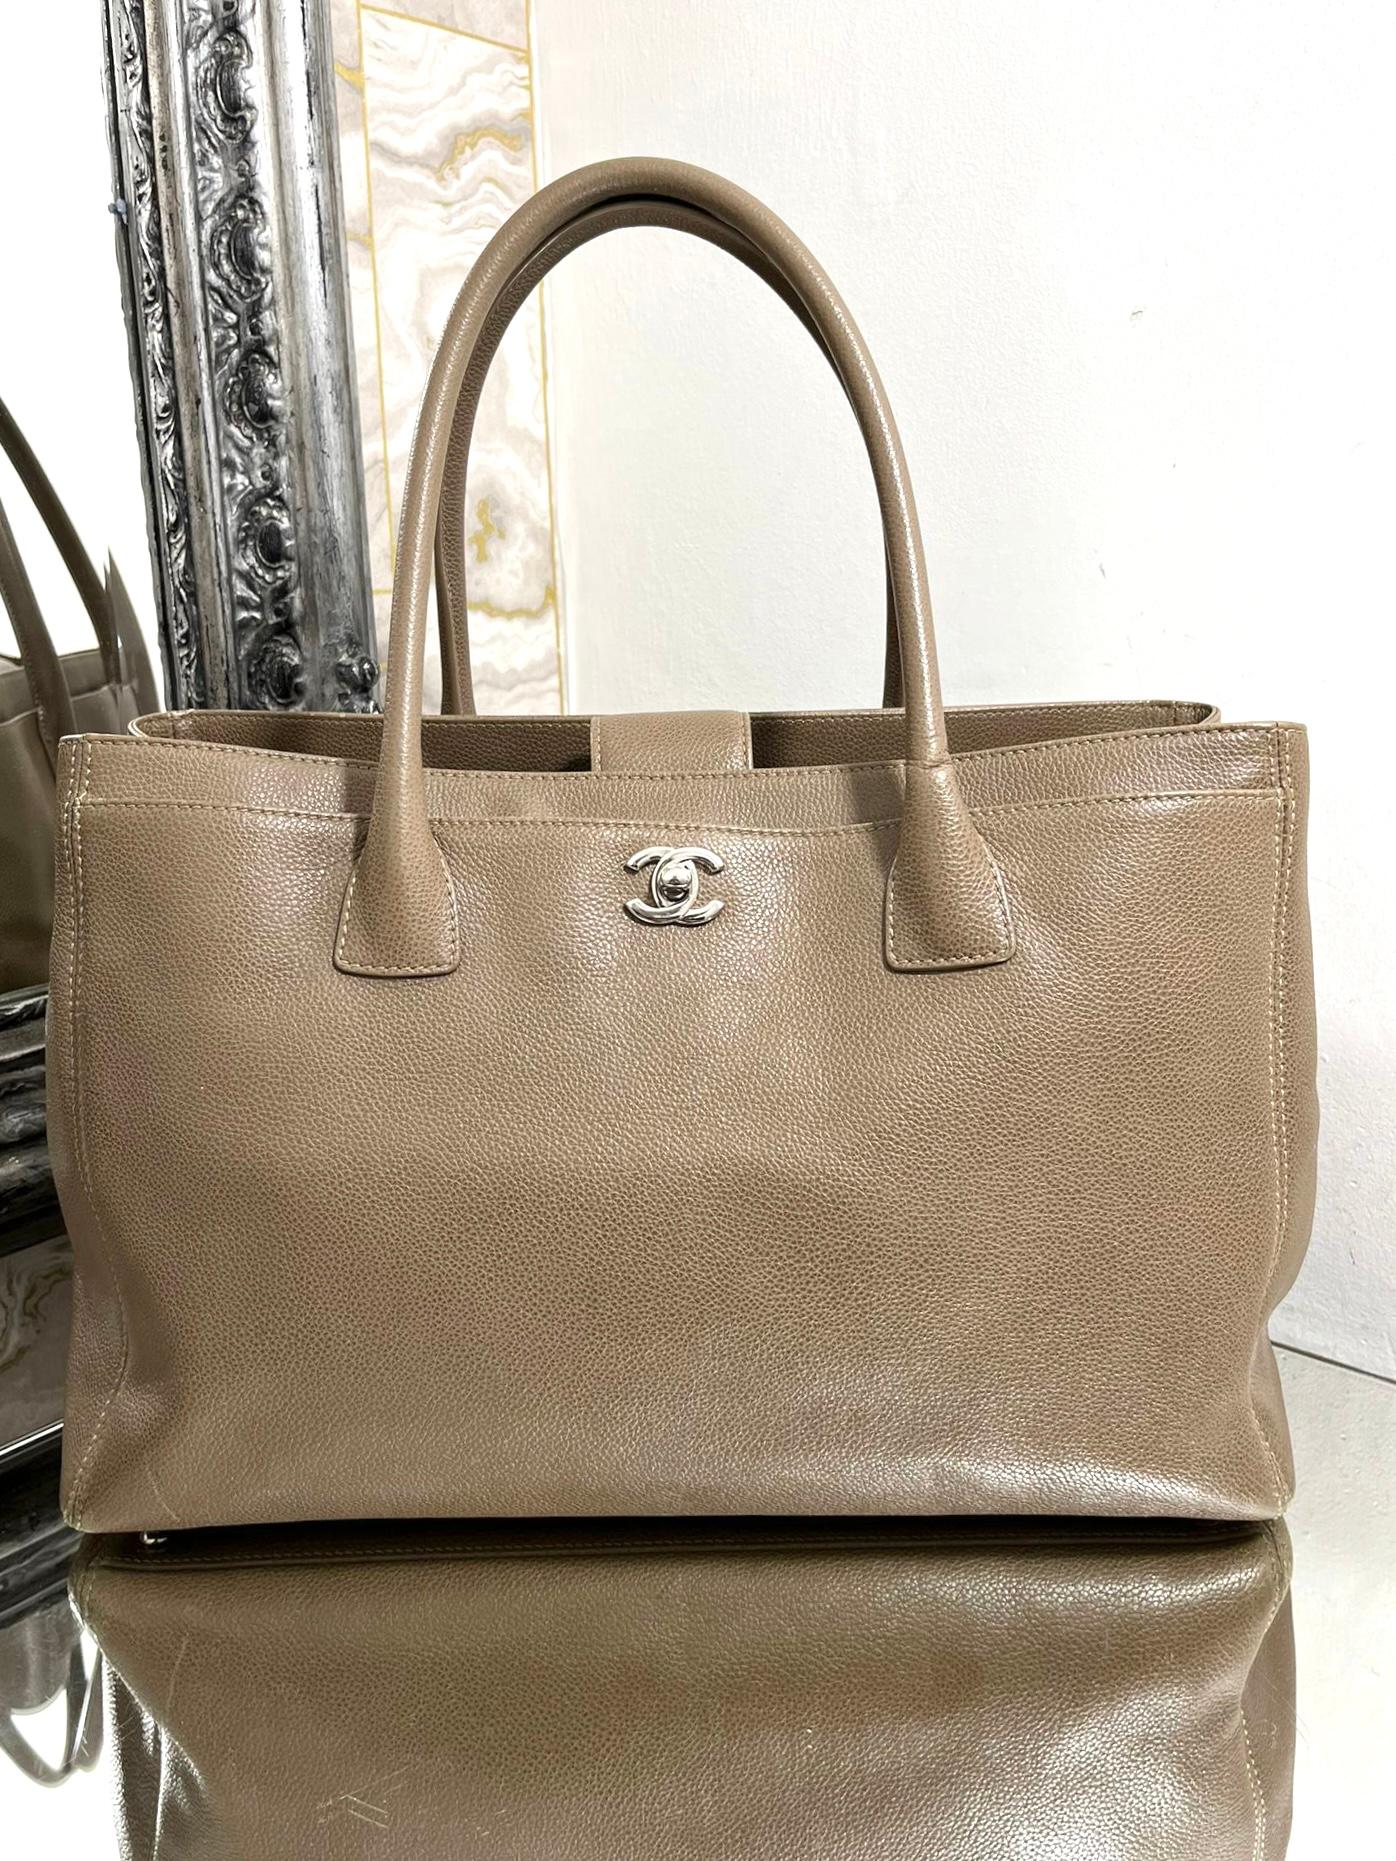 Chanel Leather Cerf Tote Bag In Fair Condition For Sale In London, GB